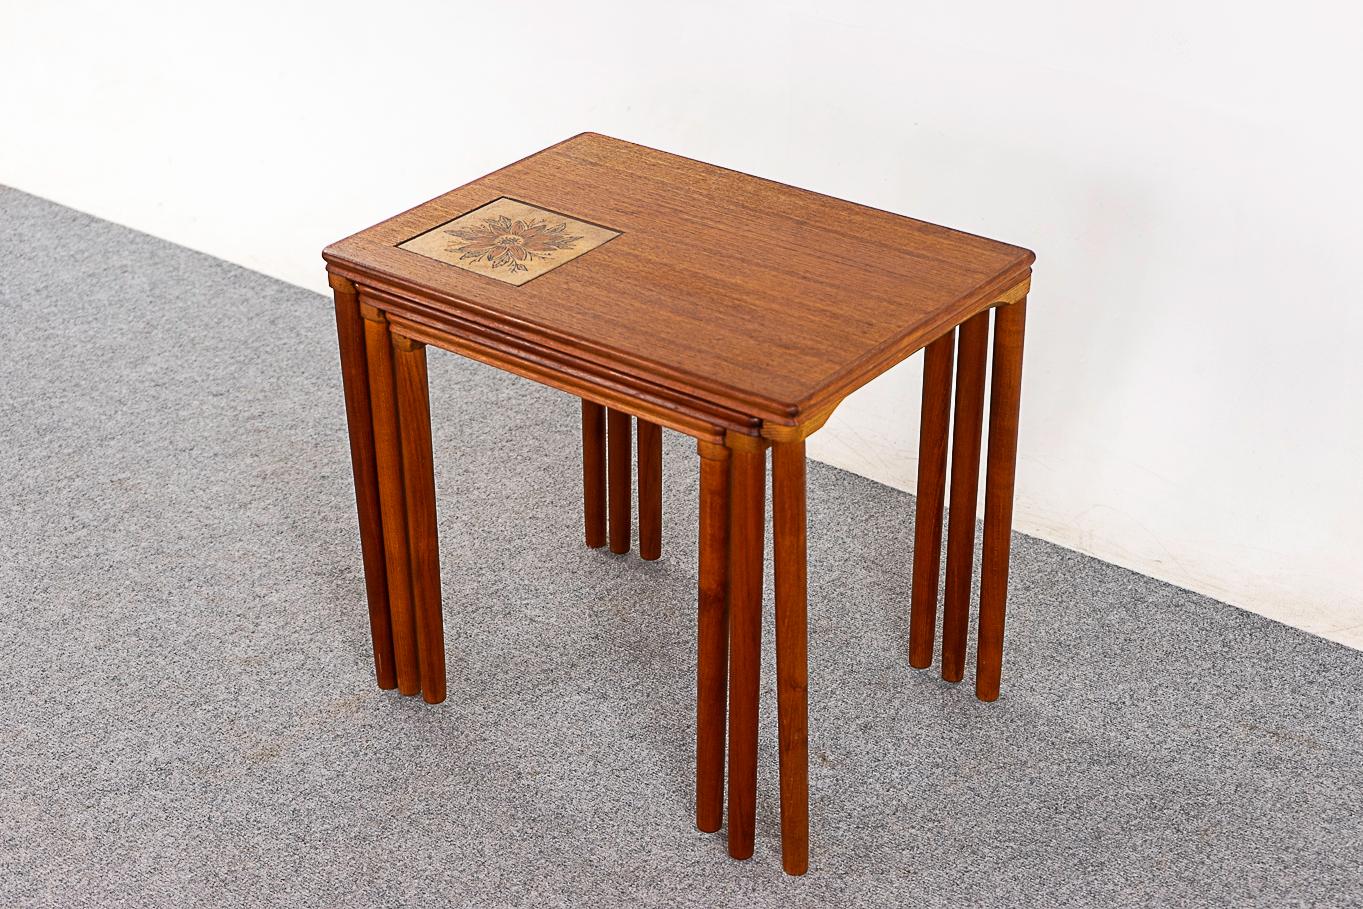 Teak & tile nesting tables, circa 1960's. Space saving design offers the footprint of one table with the functionality of three!

Unrestored item with option to purchase in restored condition for an additional $150 USD. Restoration includes: